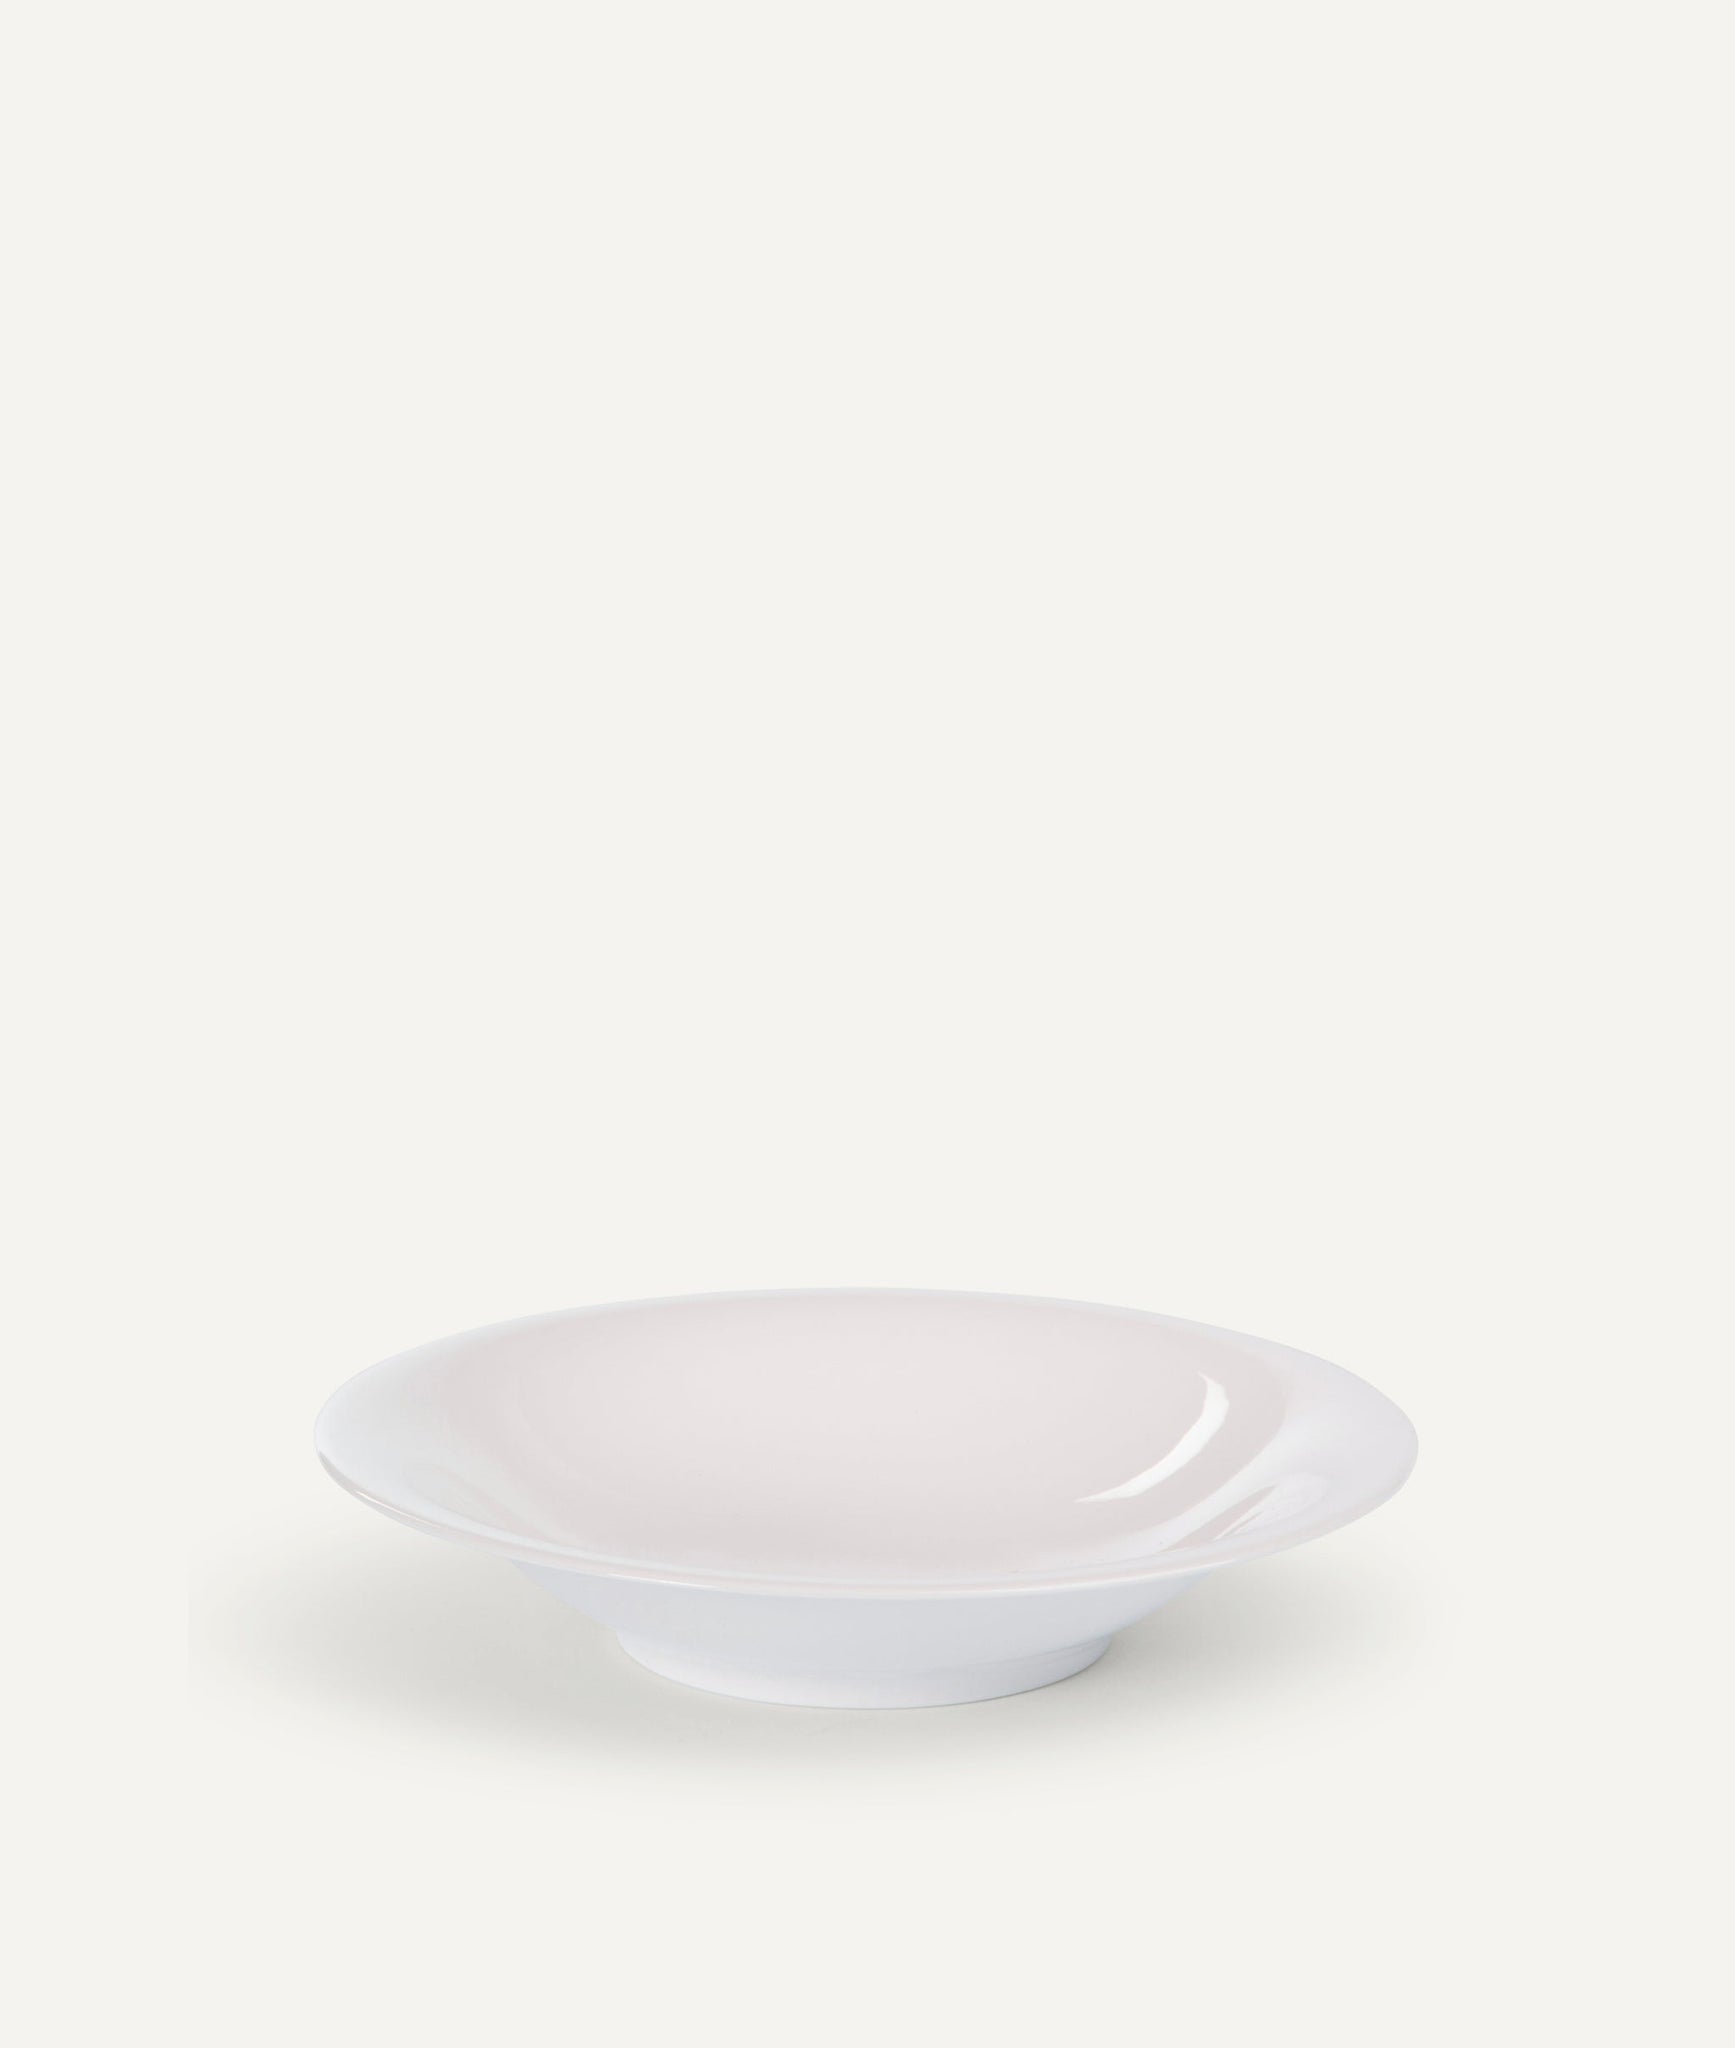 Plate Set "Drop" in Finebone China - 4 Pieces